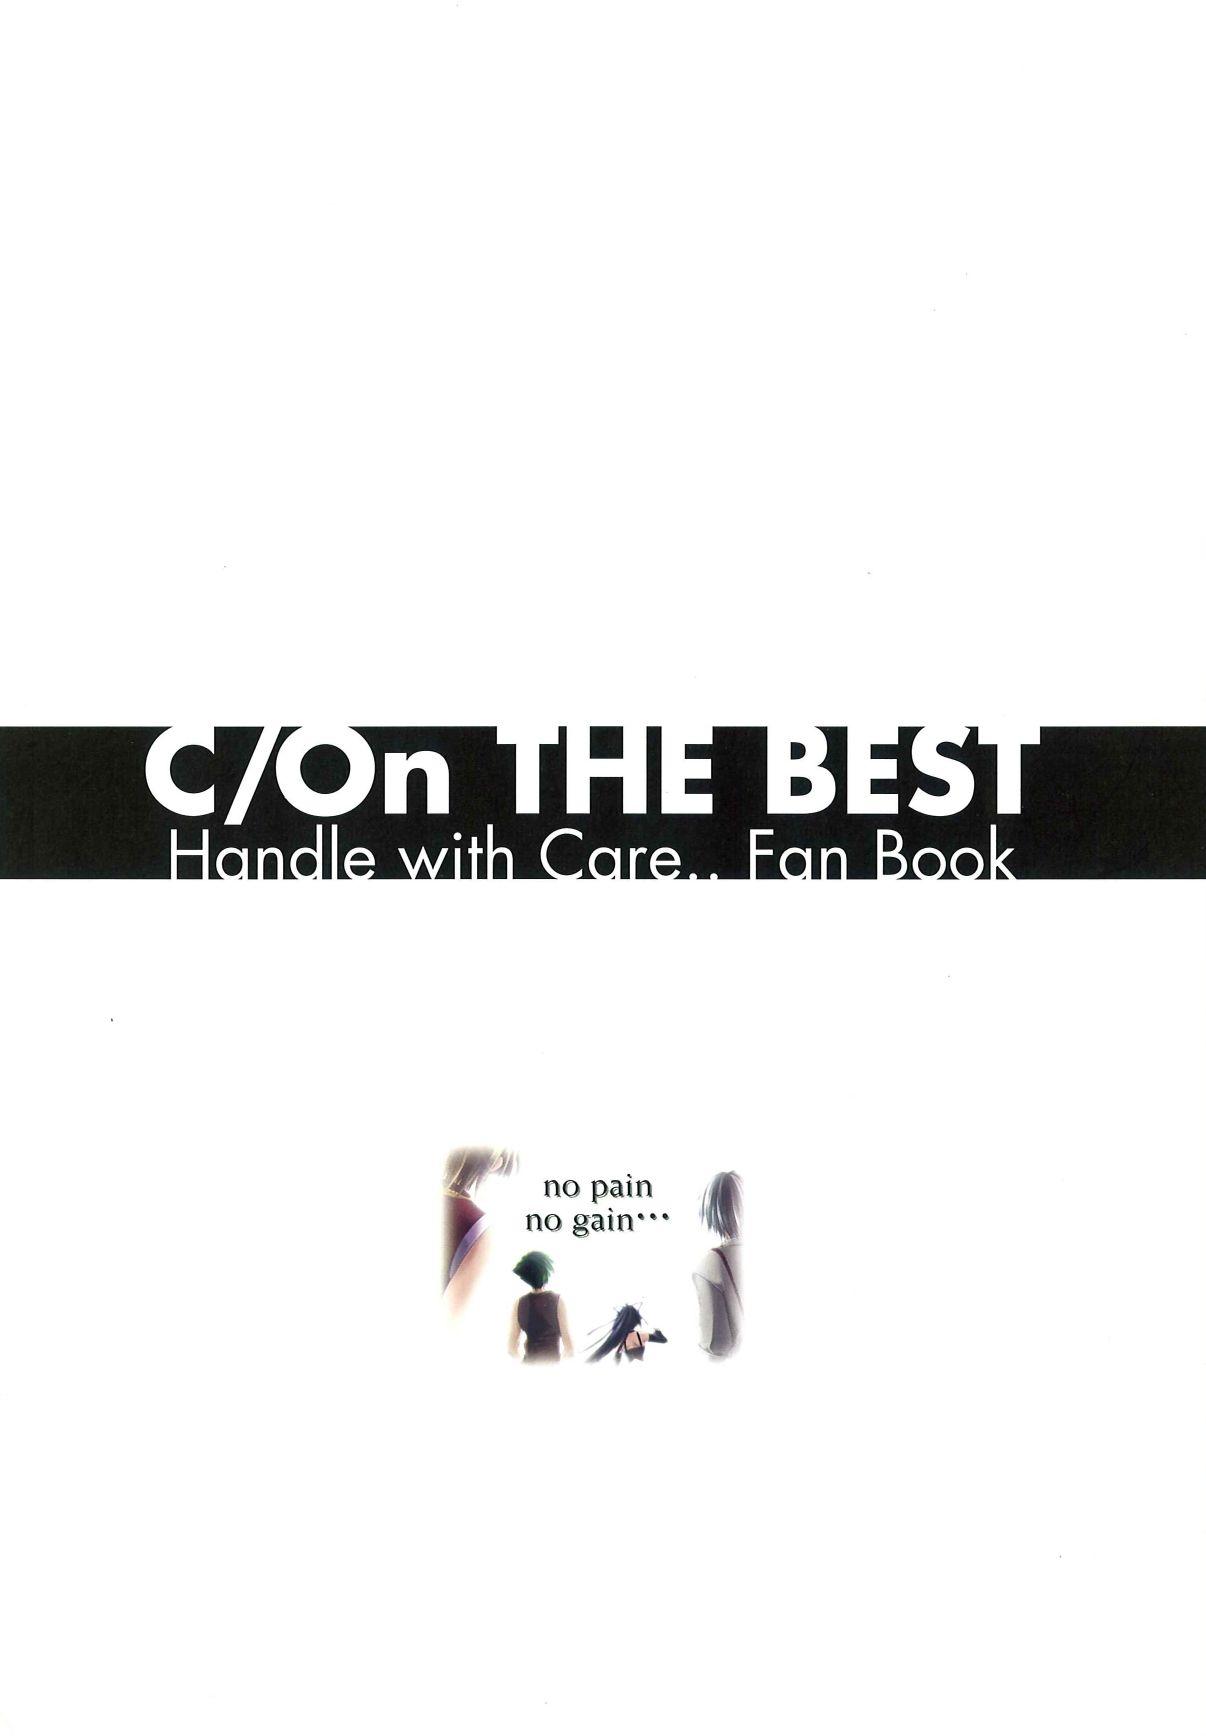 C/On THE BEST Handle with Care... OFFICIAL FAN BOOK 2